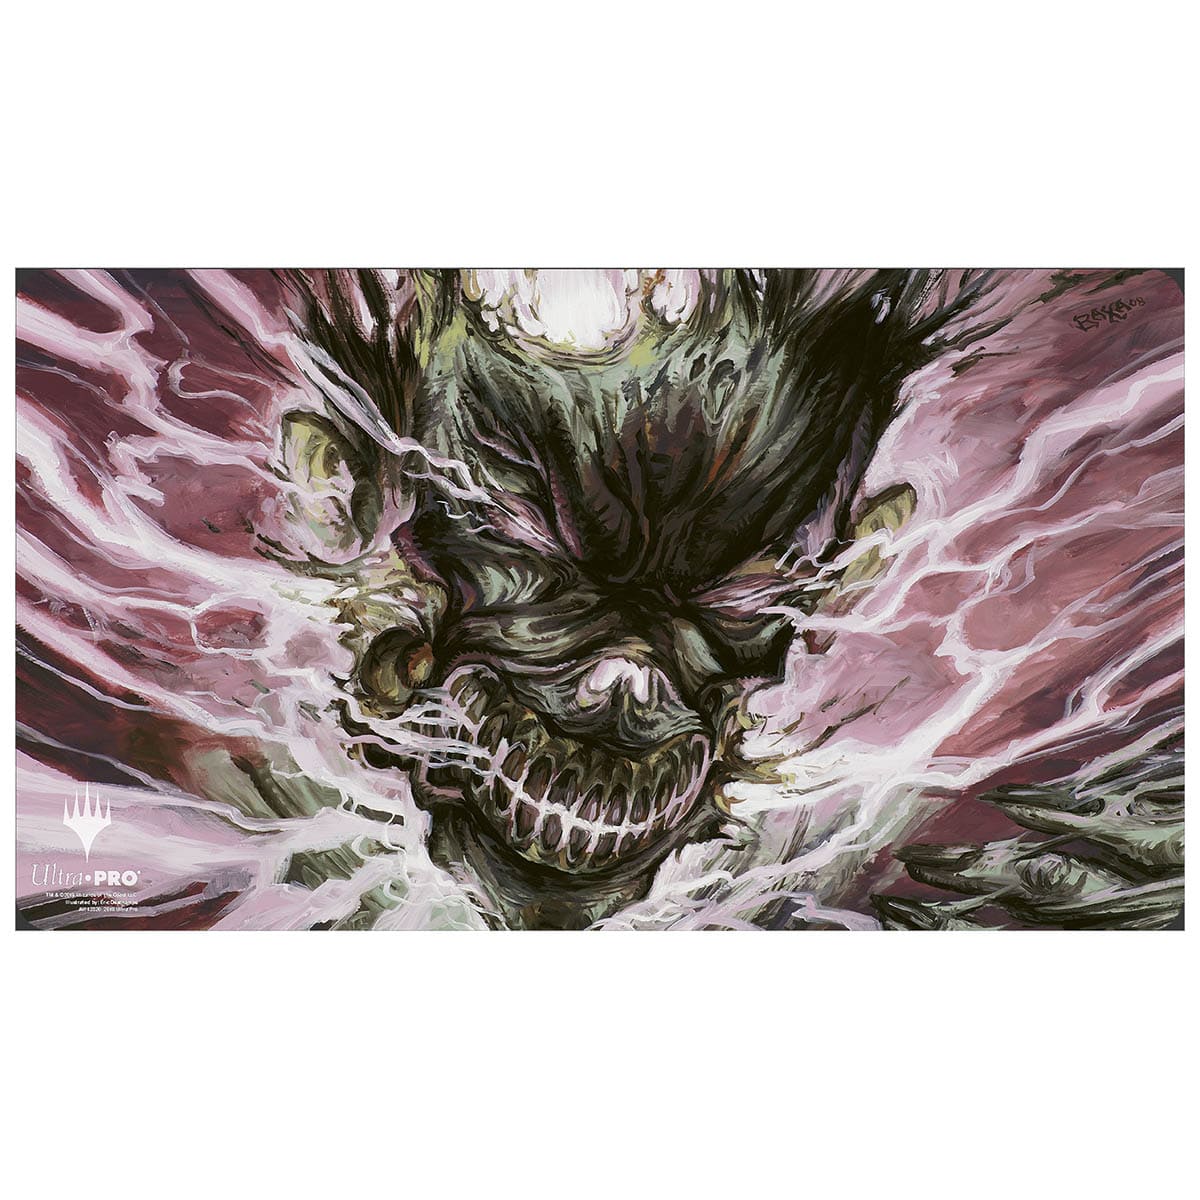 Blightning Playmat - Playmat - Original Magic Art - Accessories for Magic the Gathering and other card games